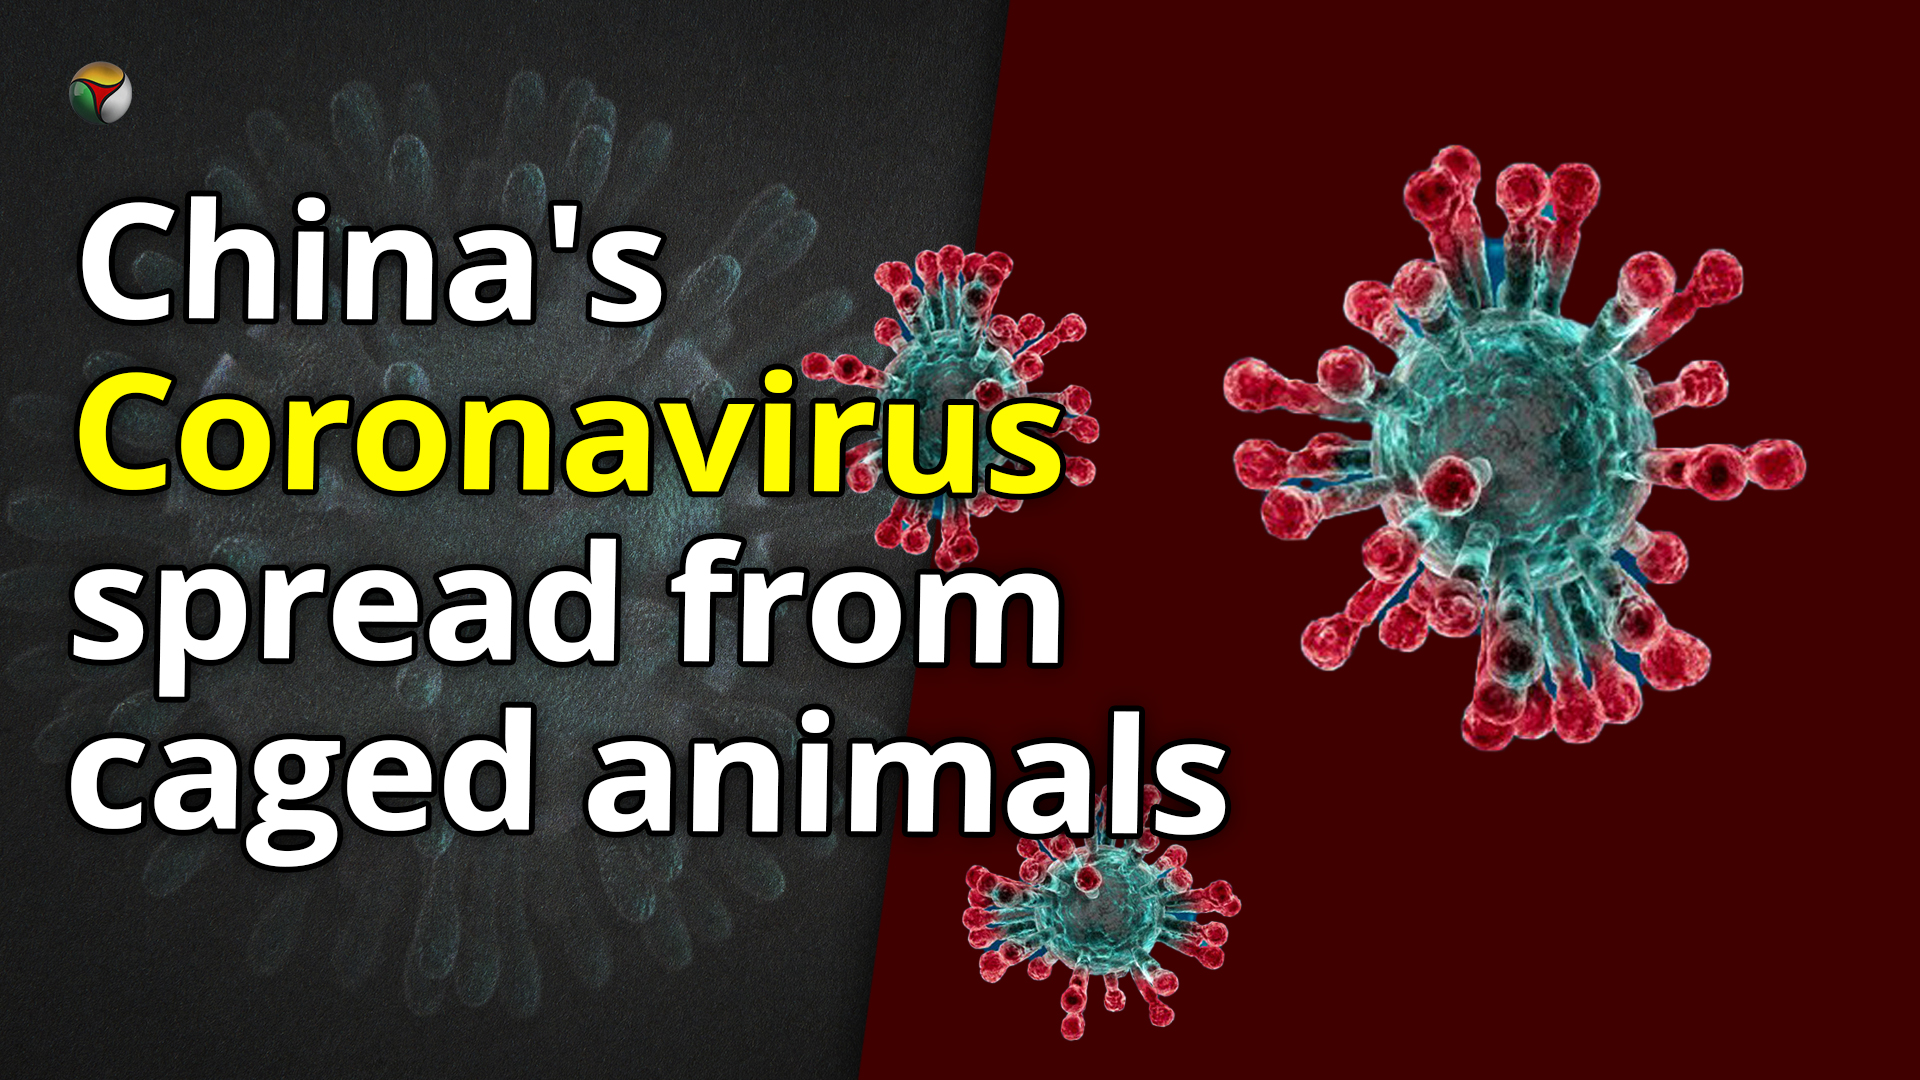 Chinas Coronavirus spread from caged animals, is difficult to detect